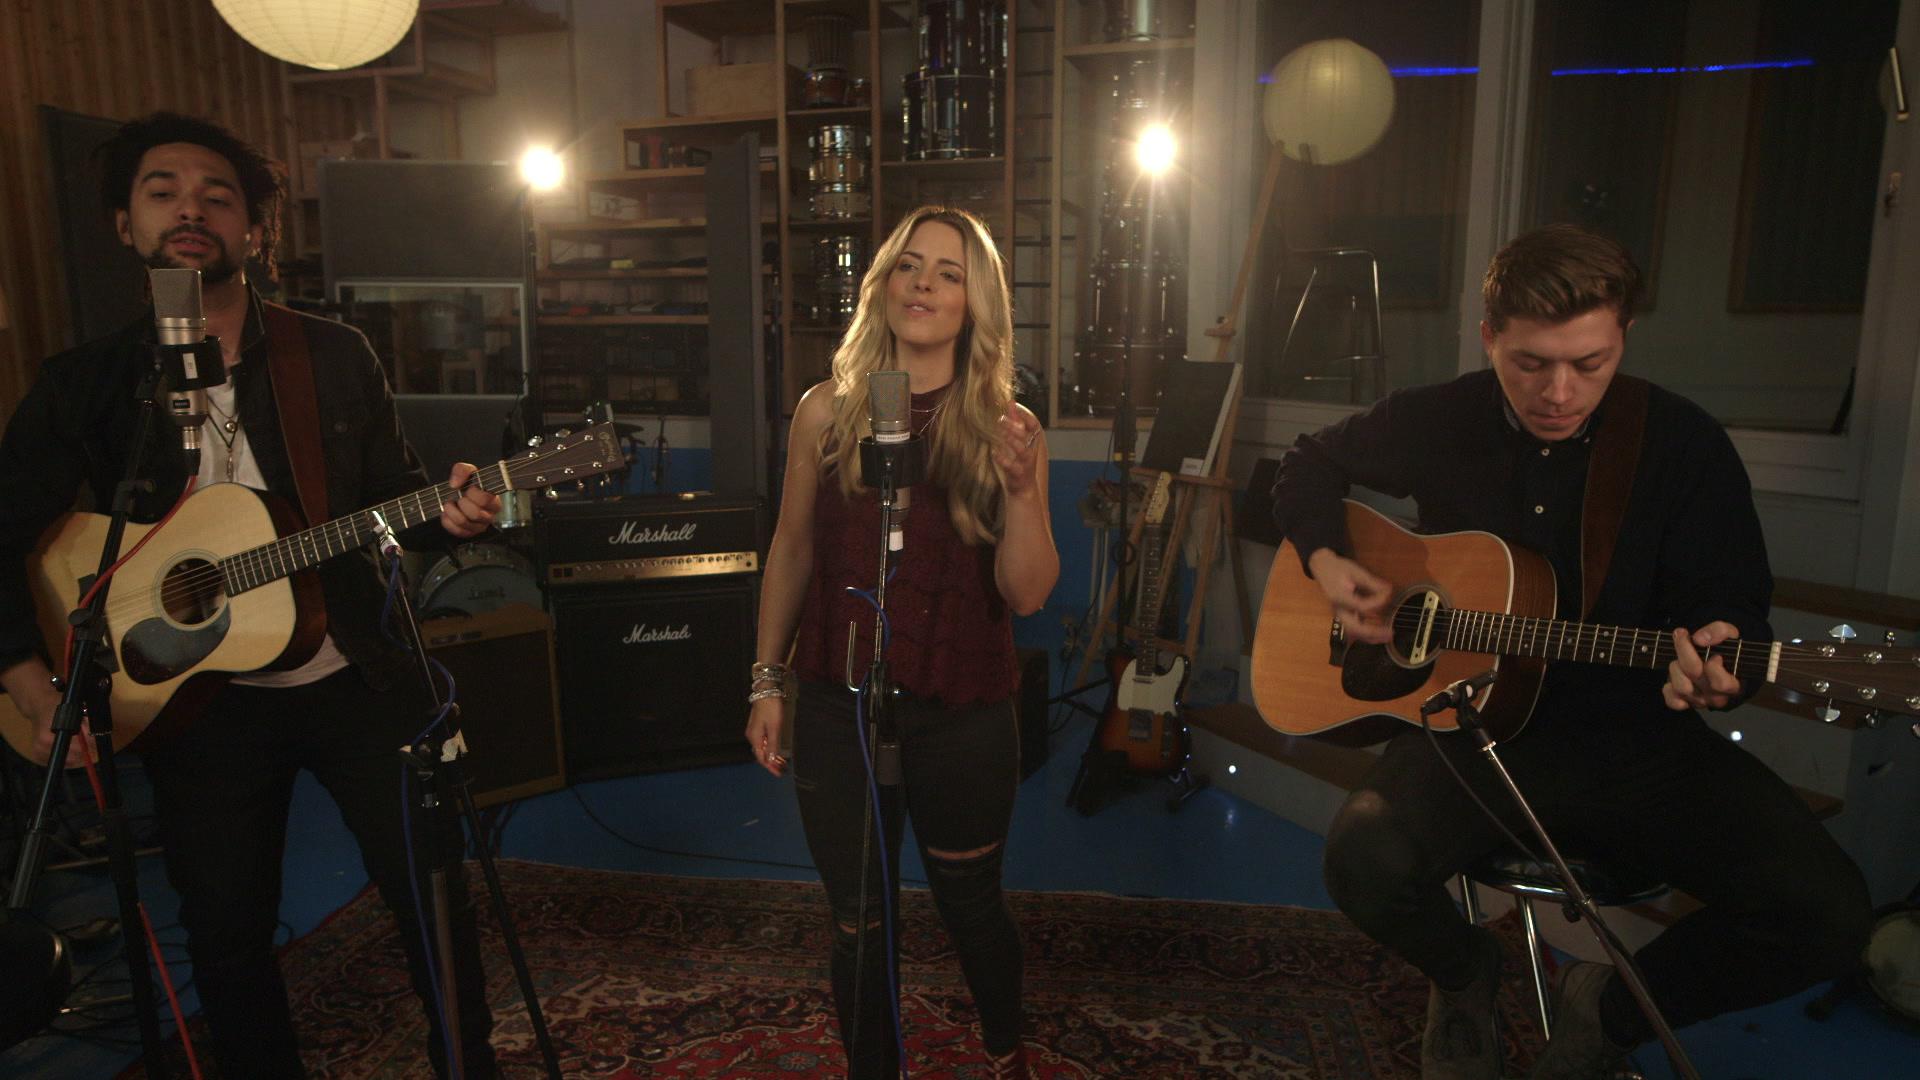 The Shires - A Thousand Hallelujahs (Live At The Pool)